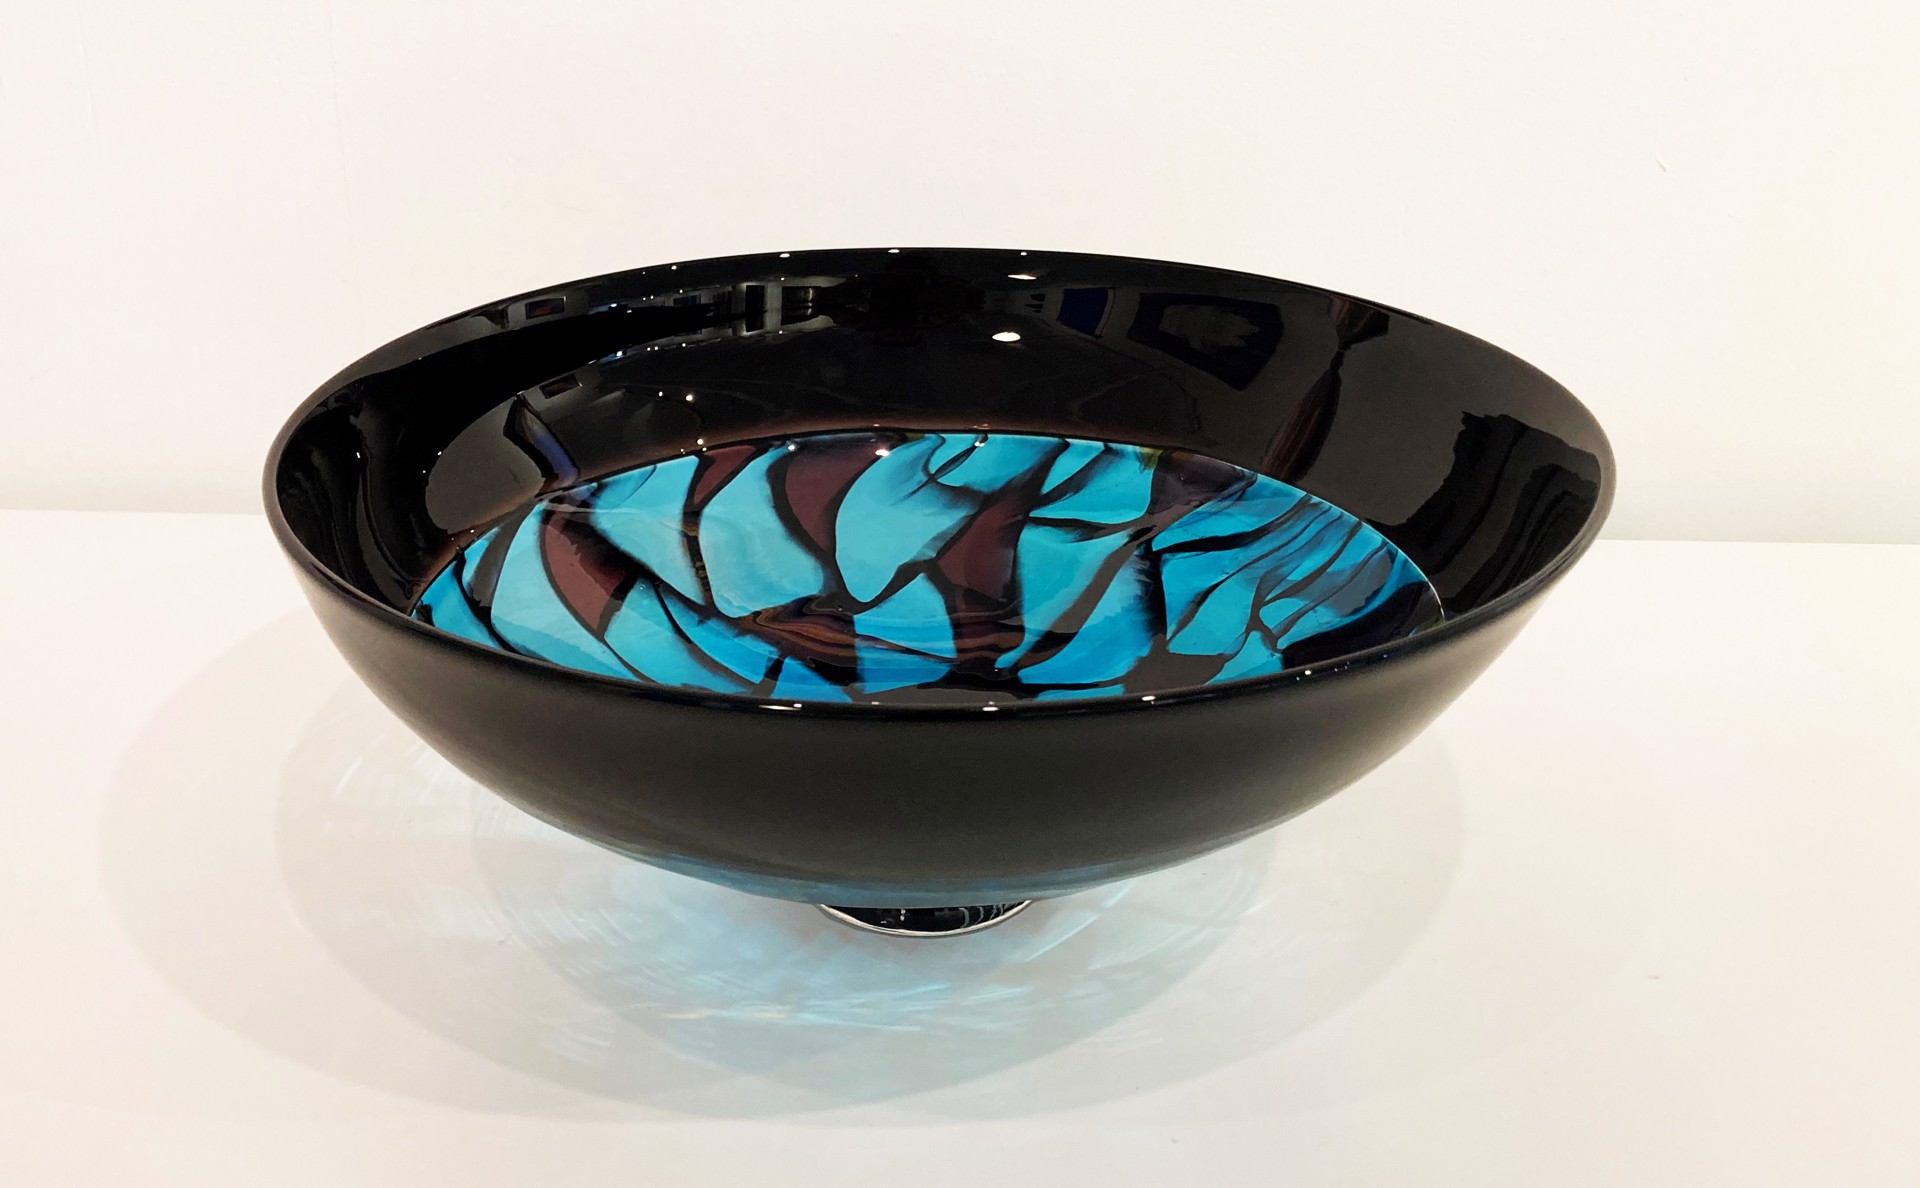 Dalle de Verre Bowl by Tyler Kimball